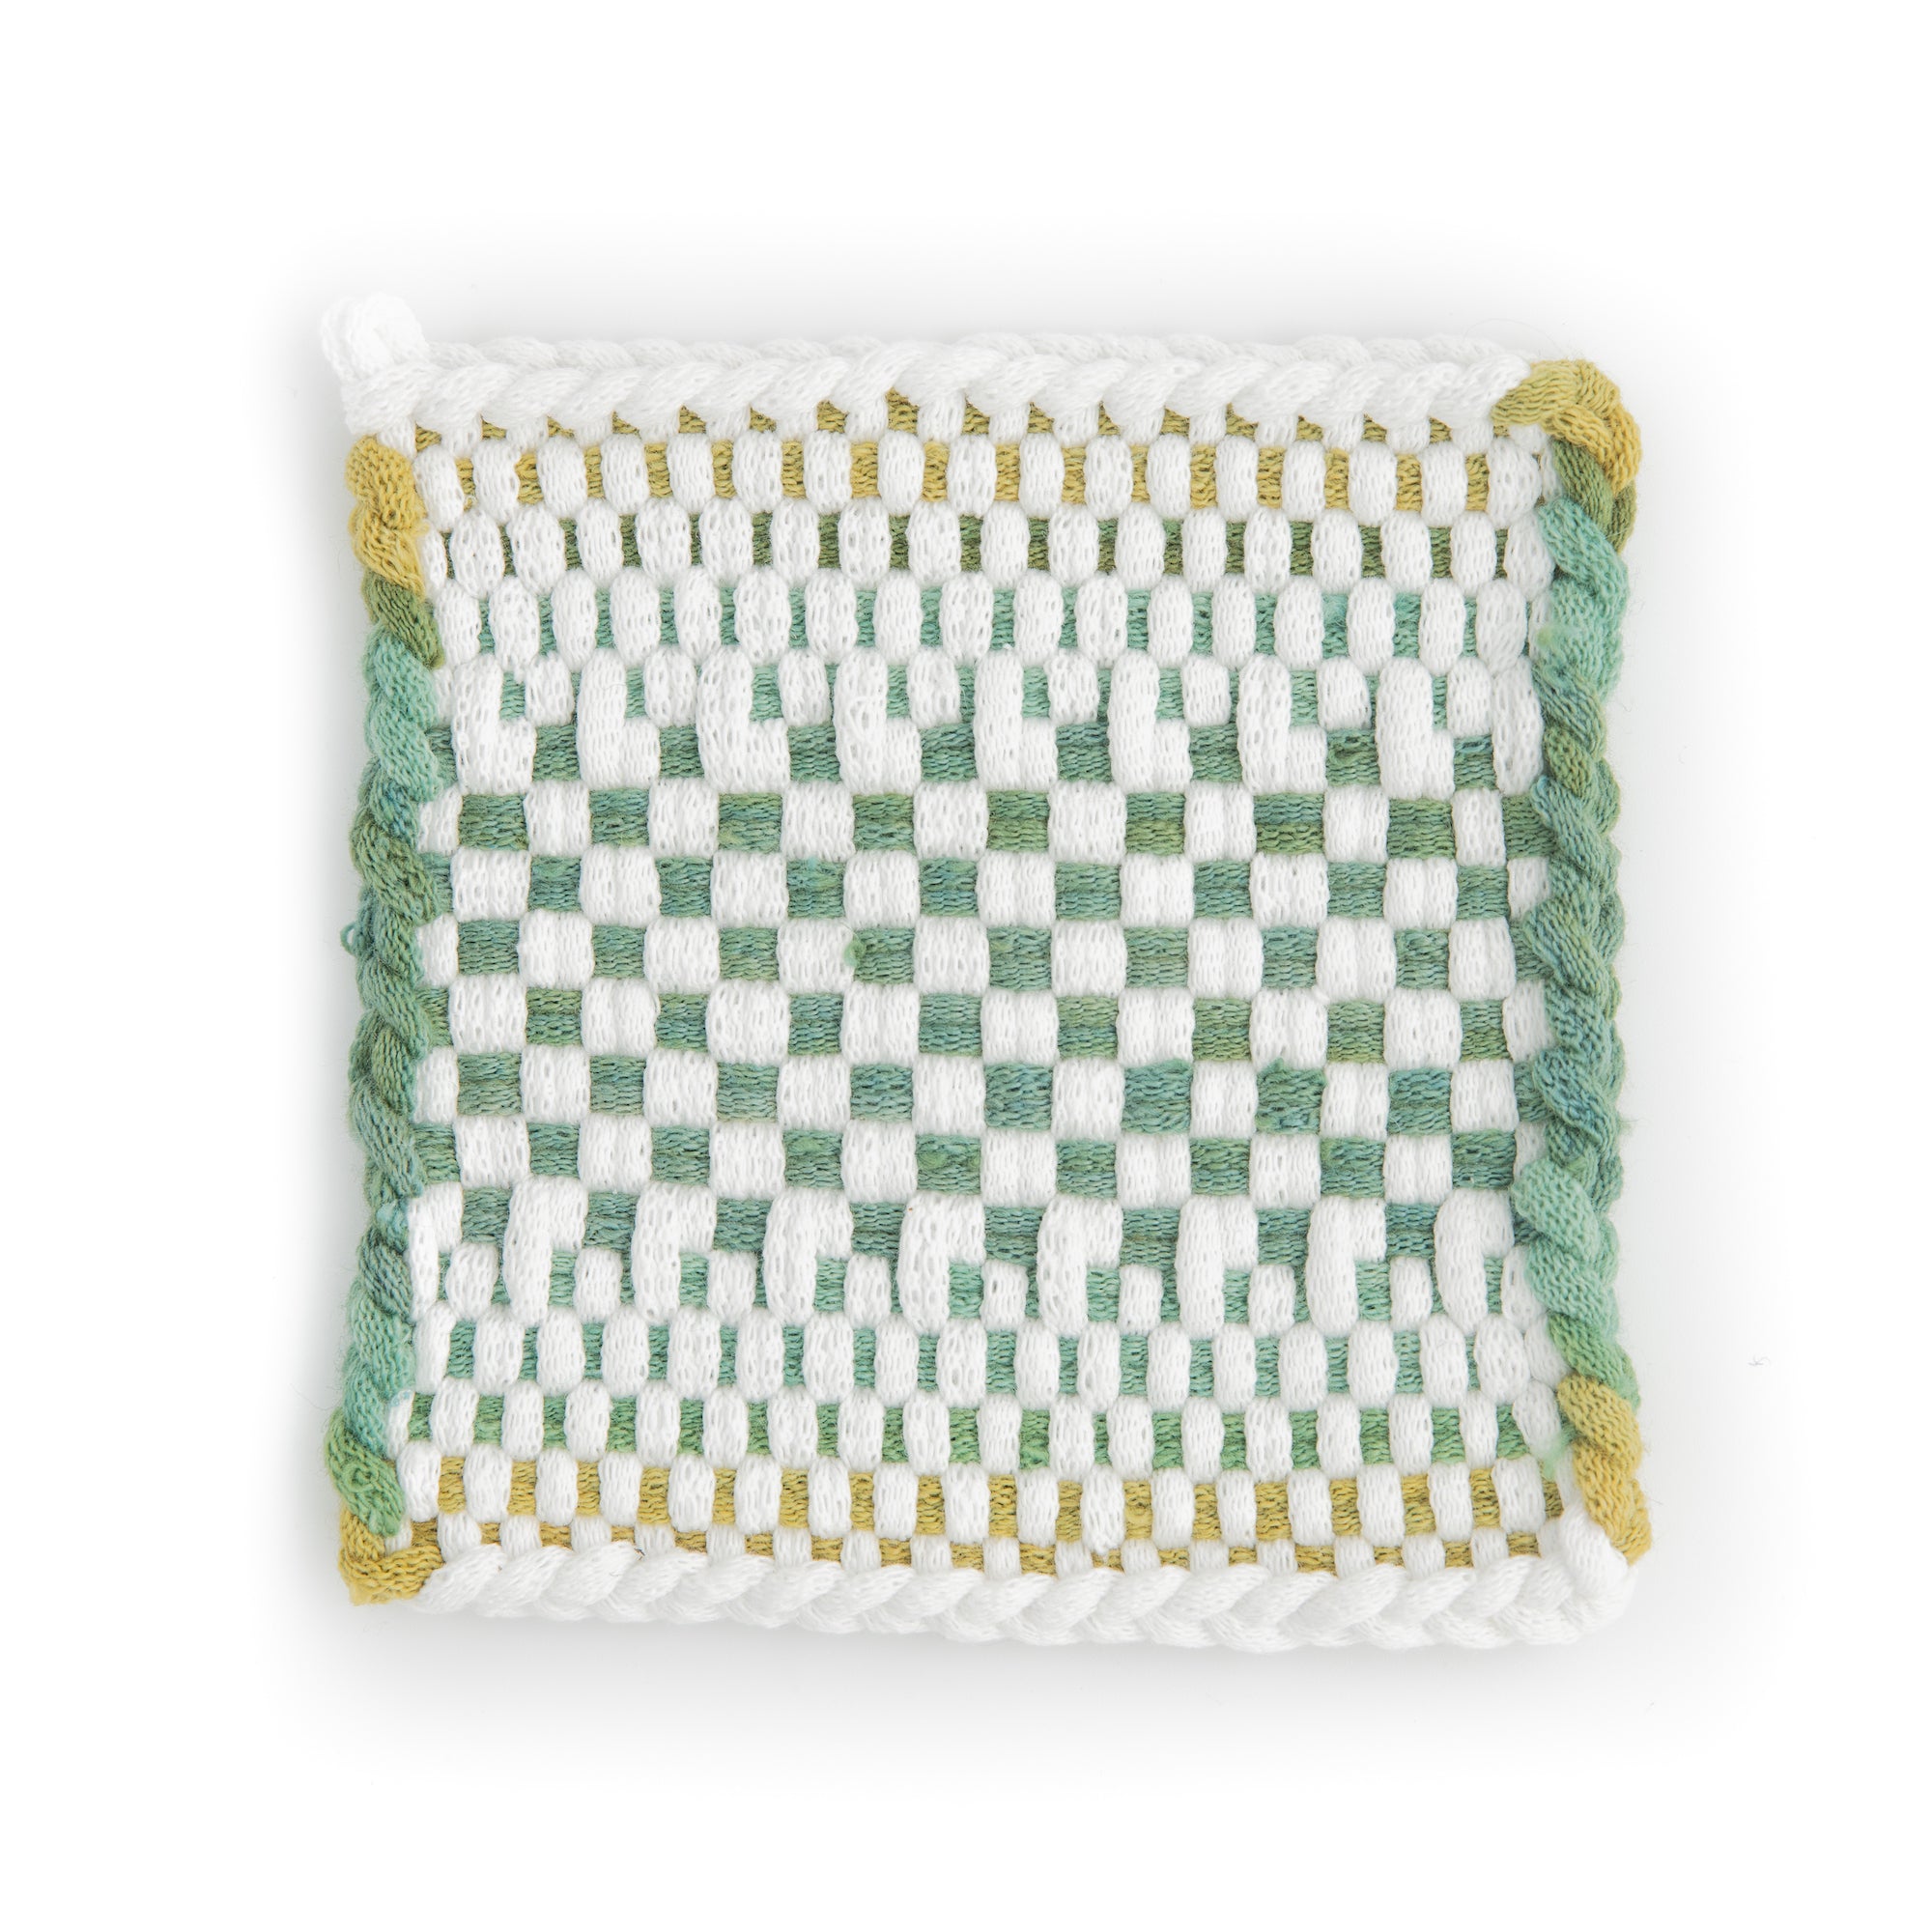 One-of-a-kind potholder in mixed spring colors